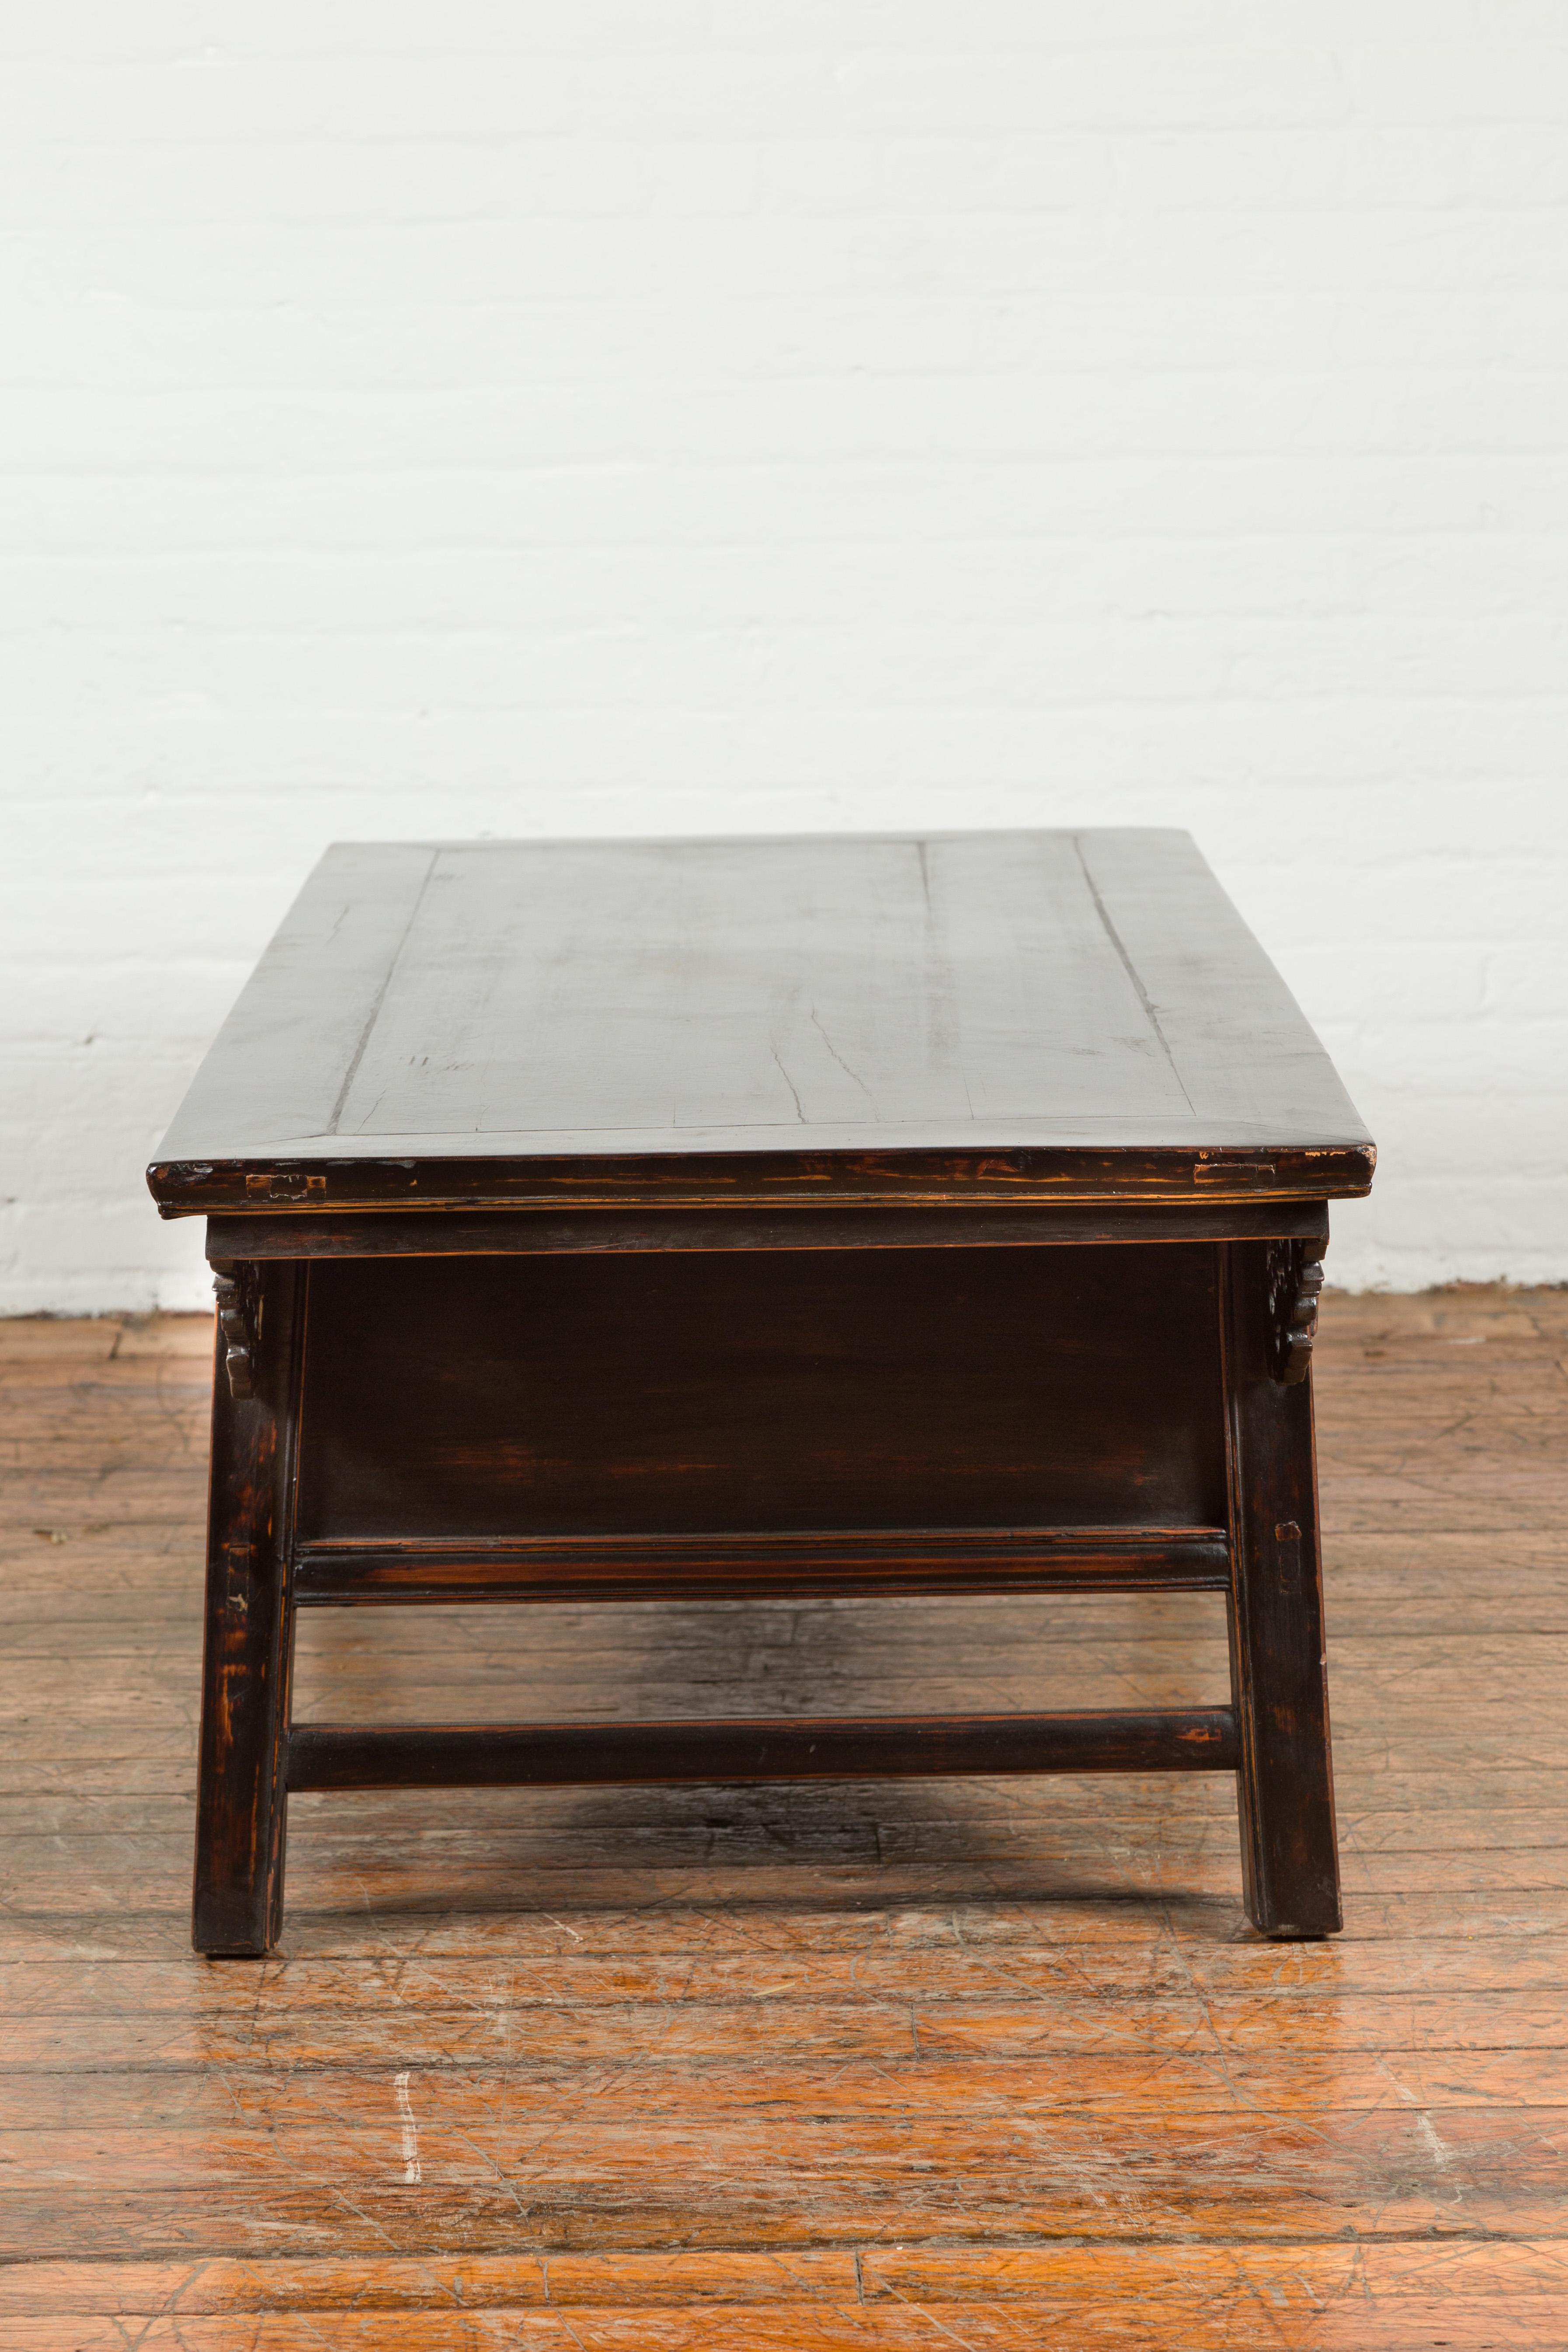 Chinese Qing Dynasty 19th Century Black Lacquer Coffee Table with Two Drawers For Sale 9